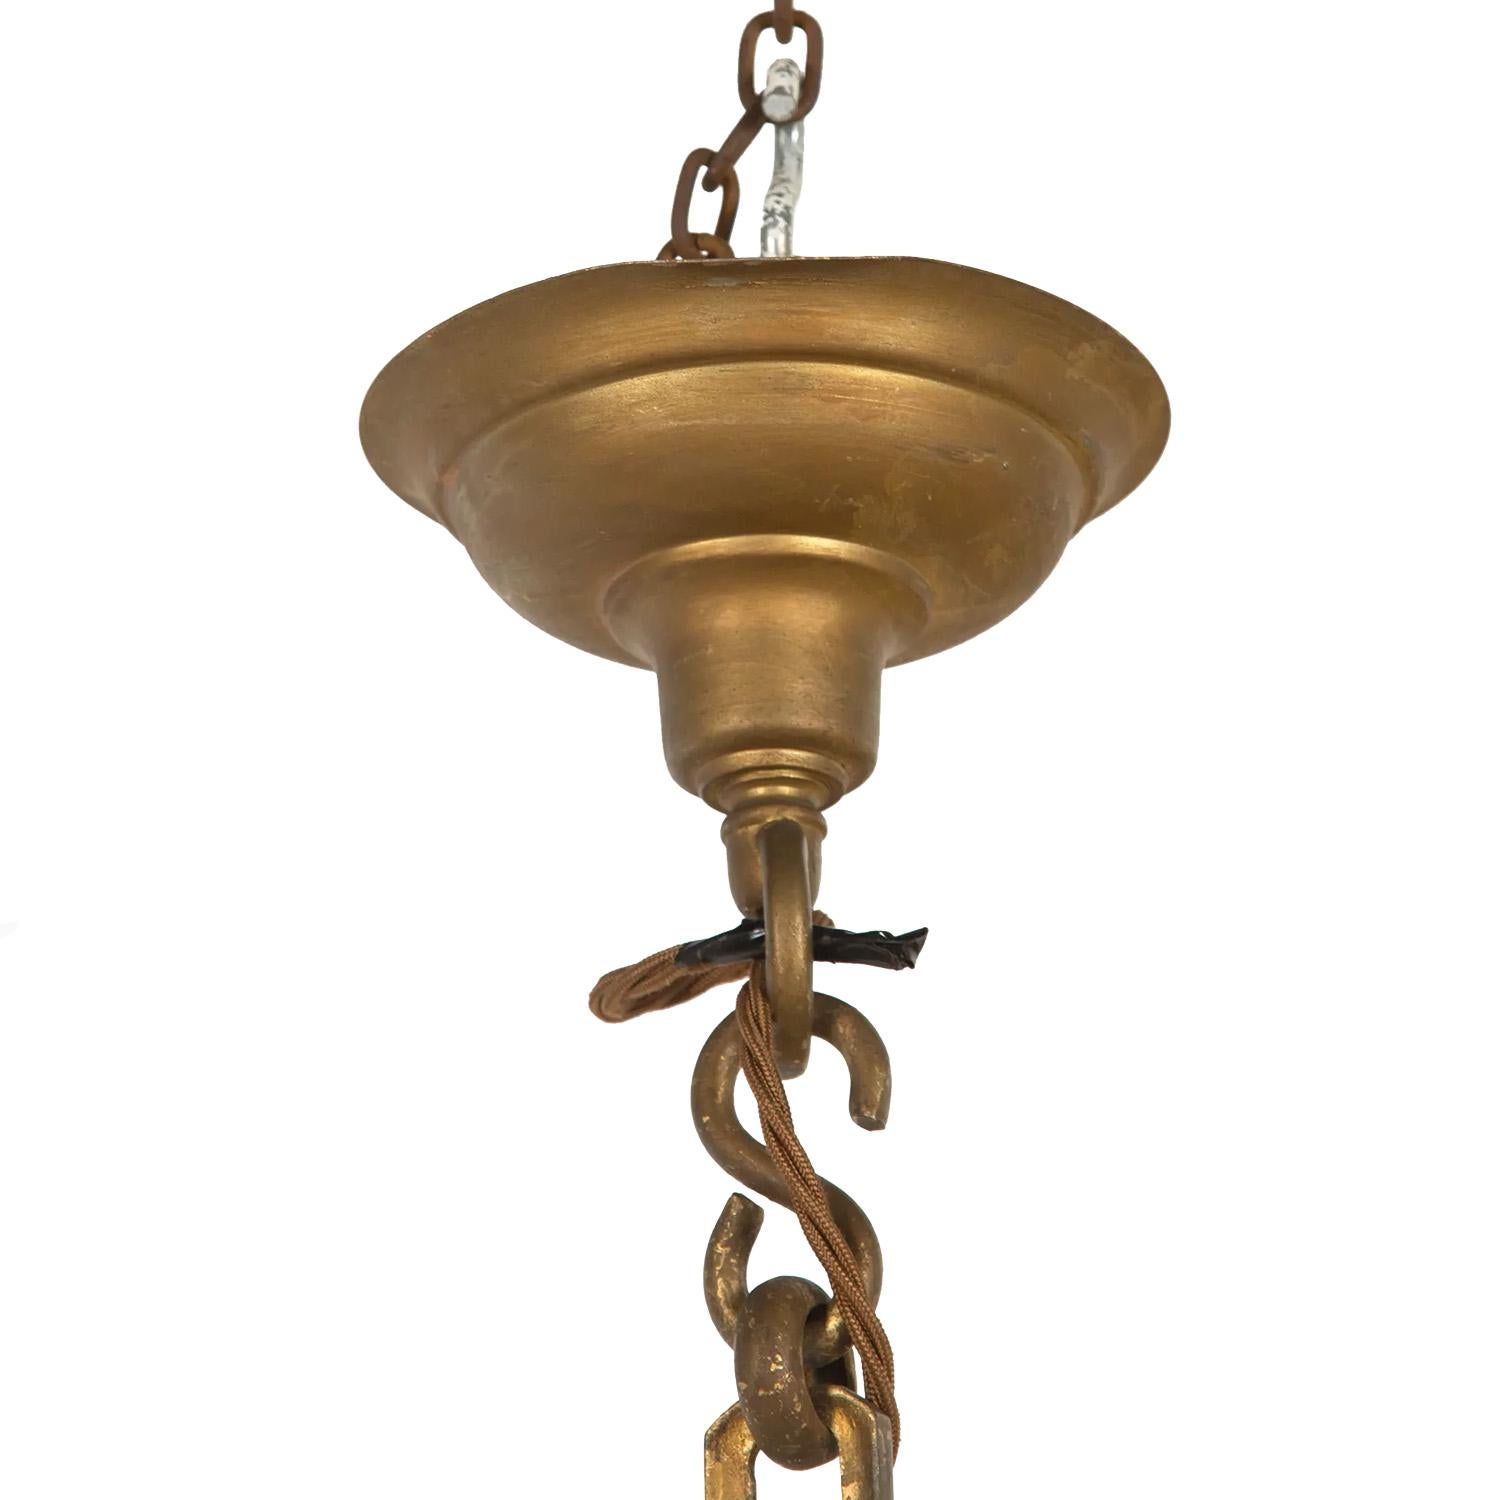 Large 19th century alabaster light with quality bronze fittings. The alabaster is in good condition with no cracks. This piece has been rewired and pat tested to UK standards